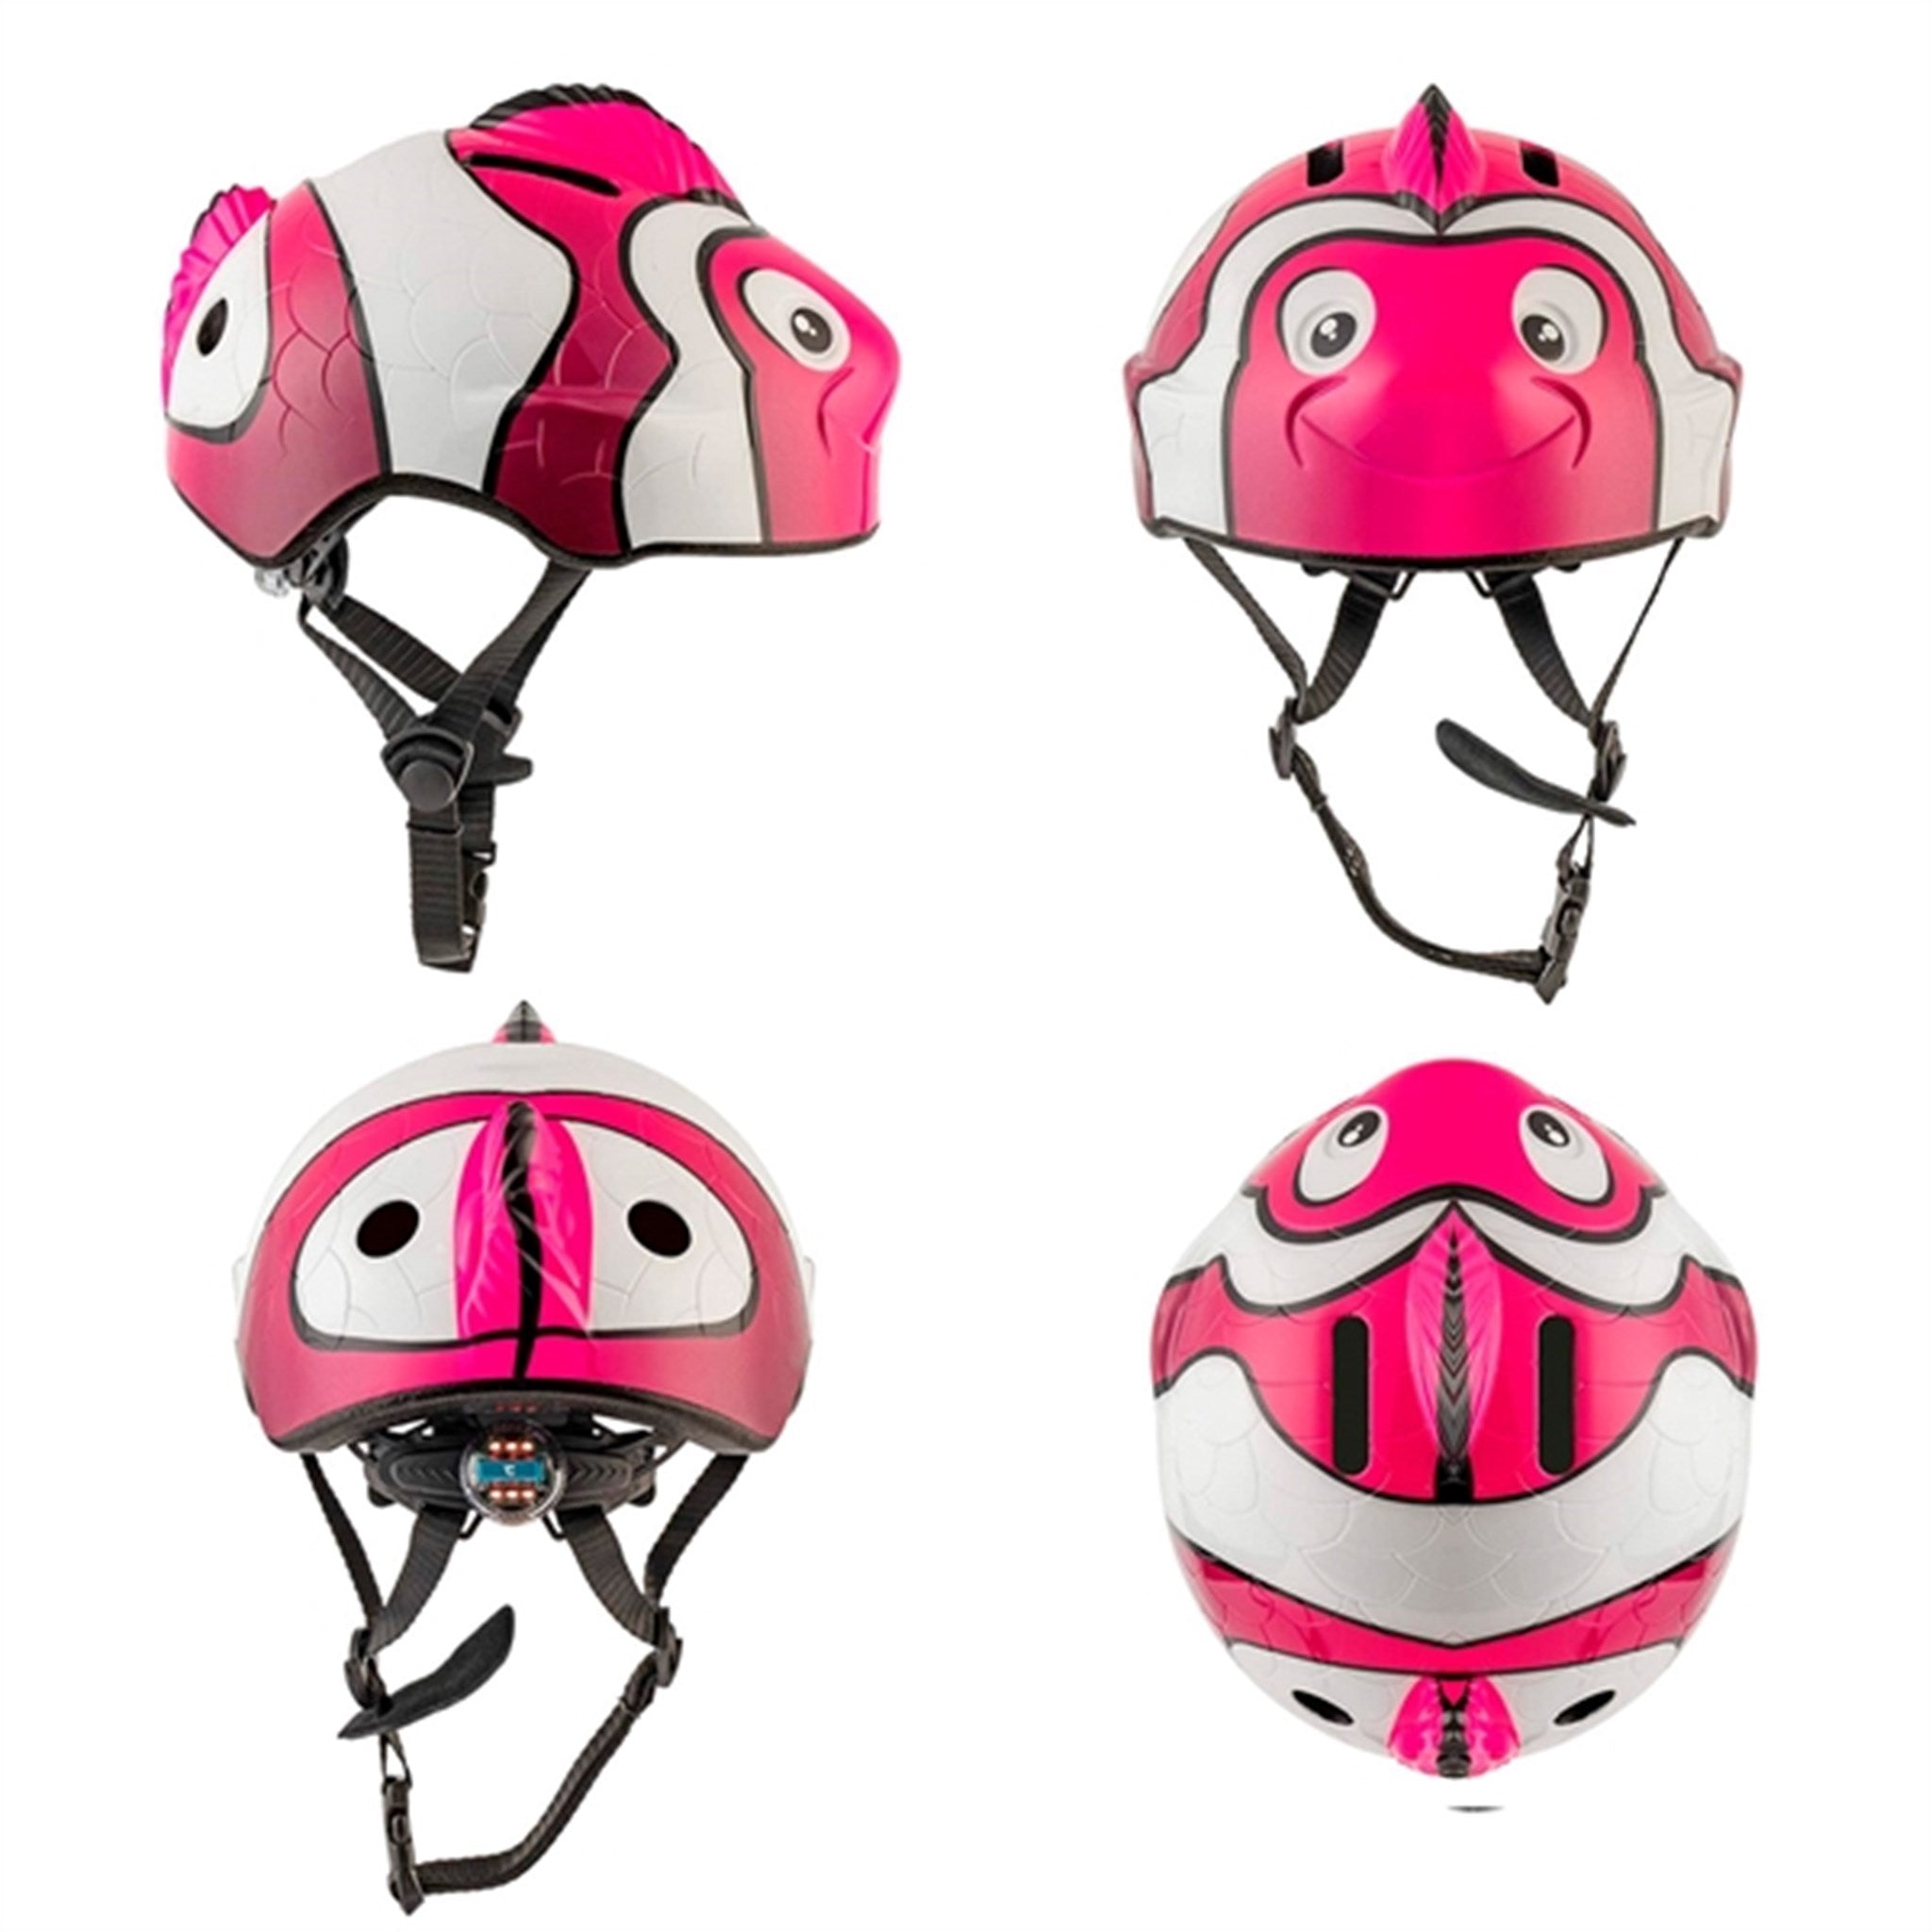 Crazy Safety Fish Bicycle Helmet Pink 5